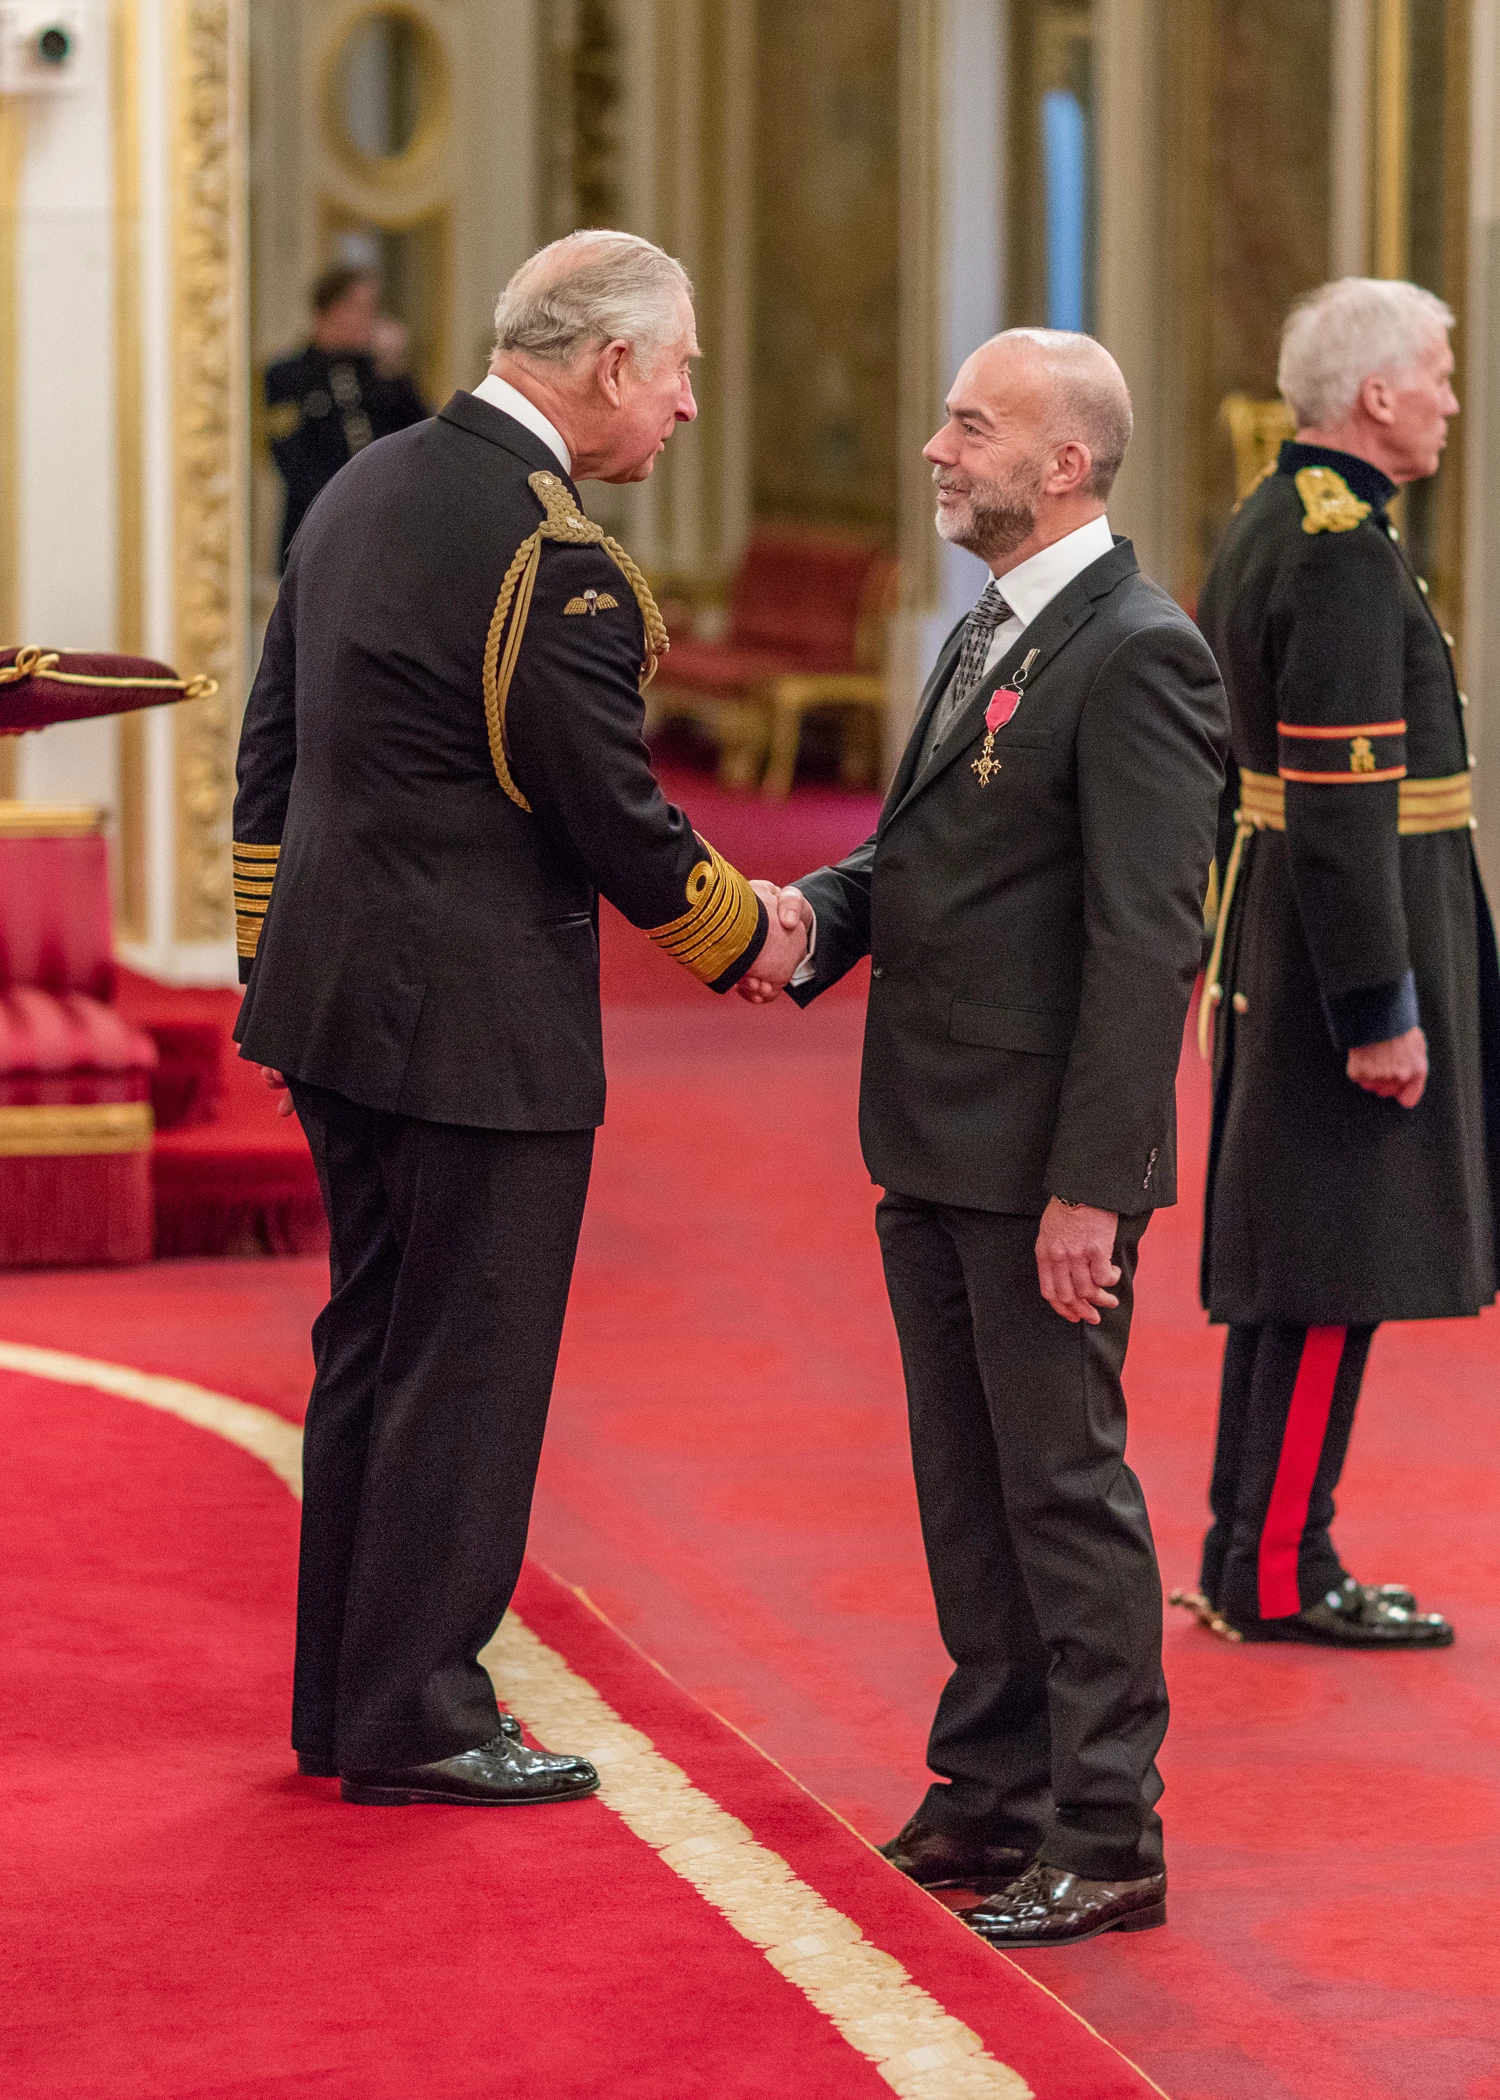 Vincent Ferguson of Inciner8 collecting his OBE